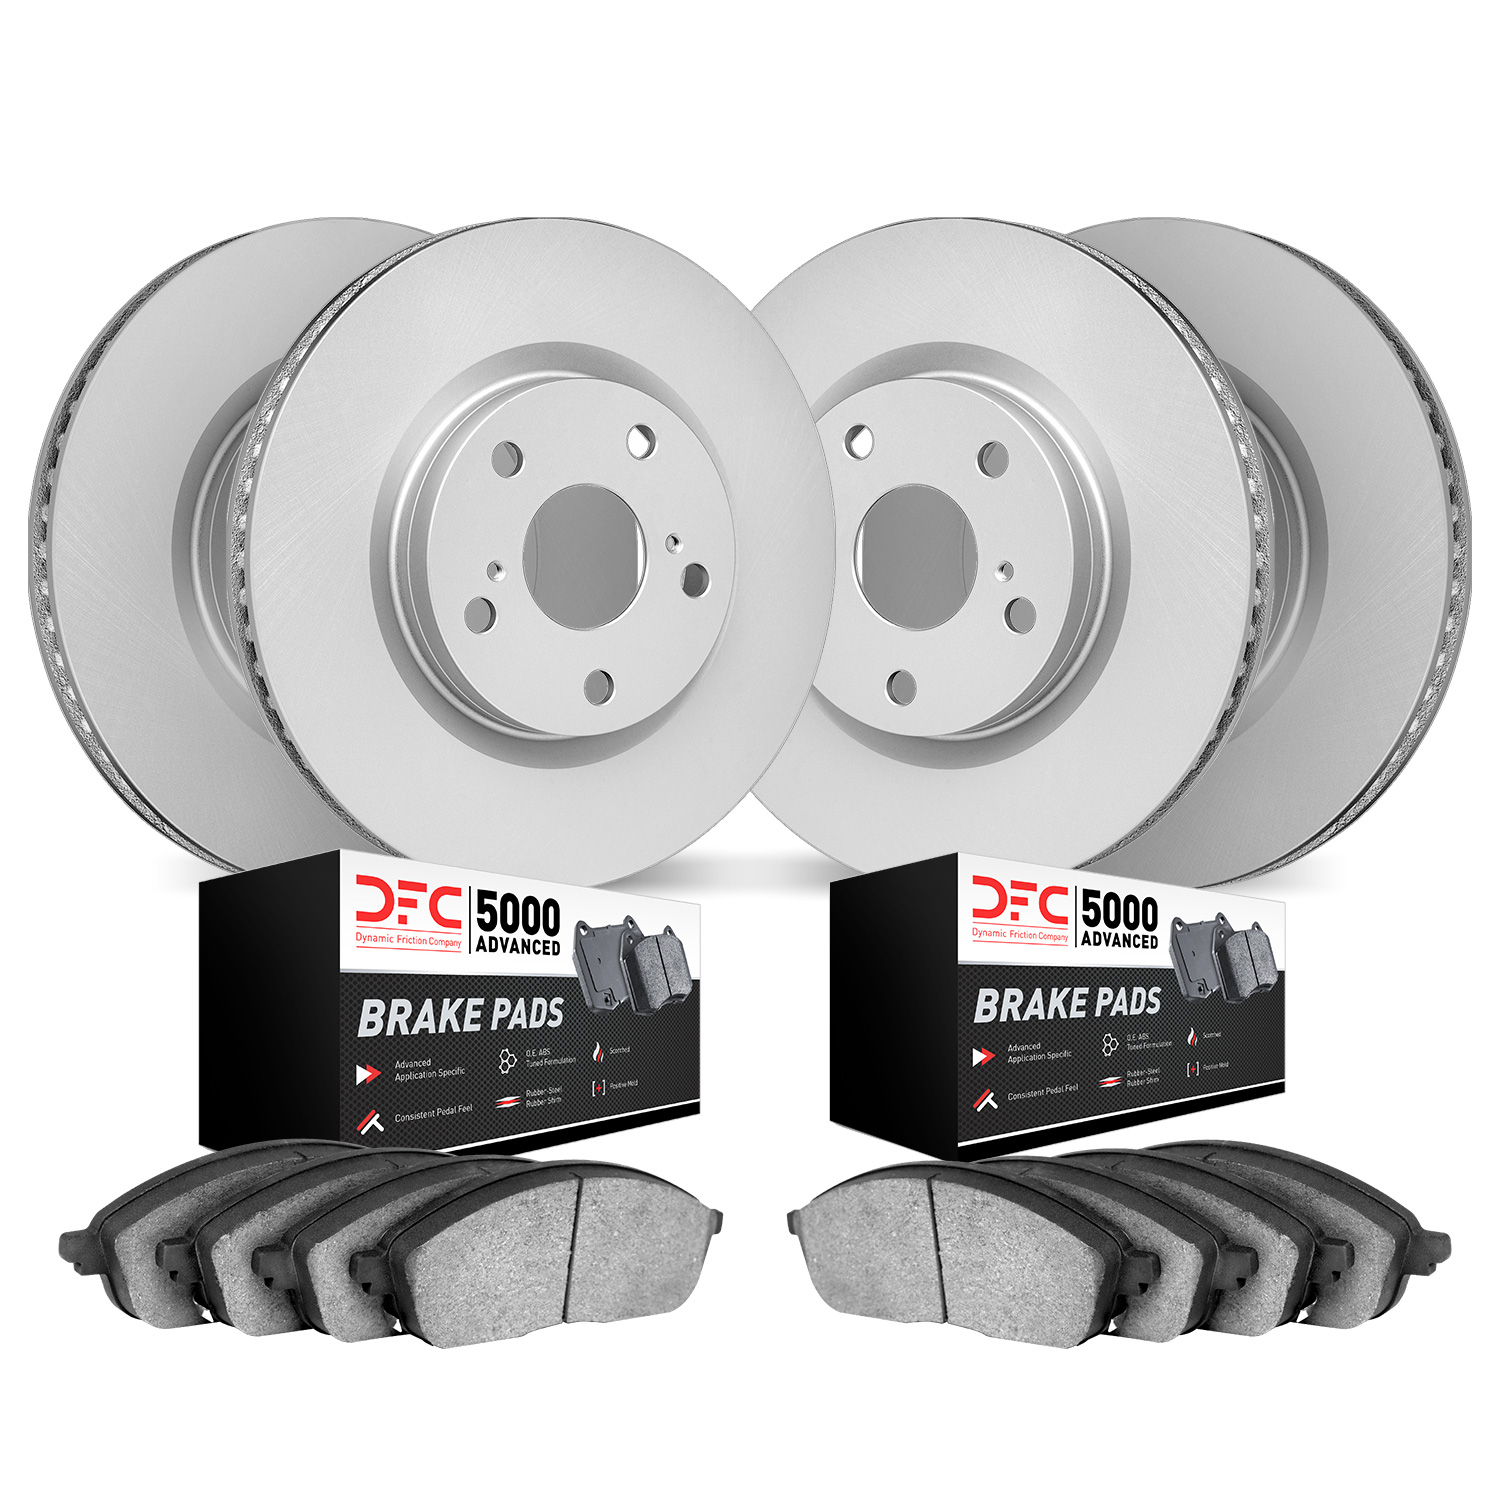 4504-54109 Geospec Brake Rotors w/5000 Advanced Brake Pads Kit, 2015-2020 Ford/Lincoln/Mercury/Mazda, Position: Front and Rear